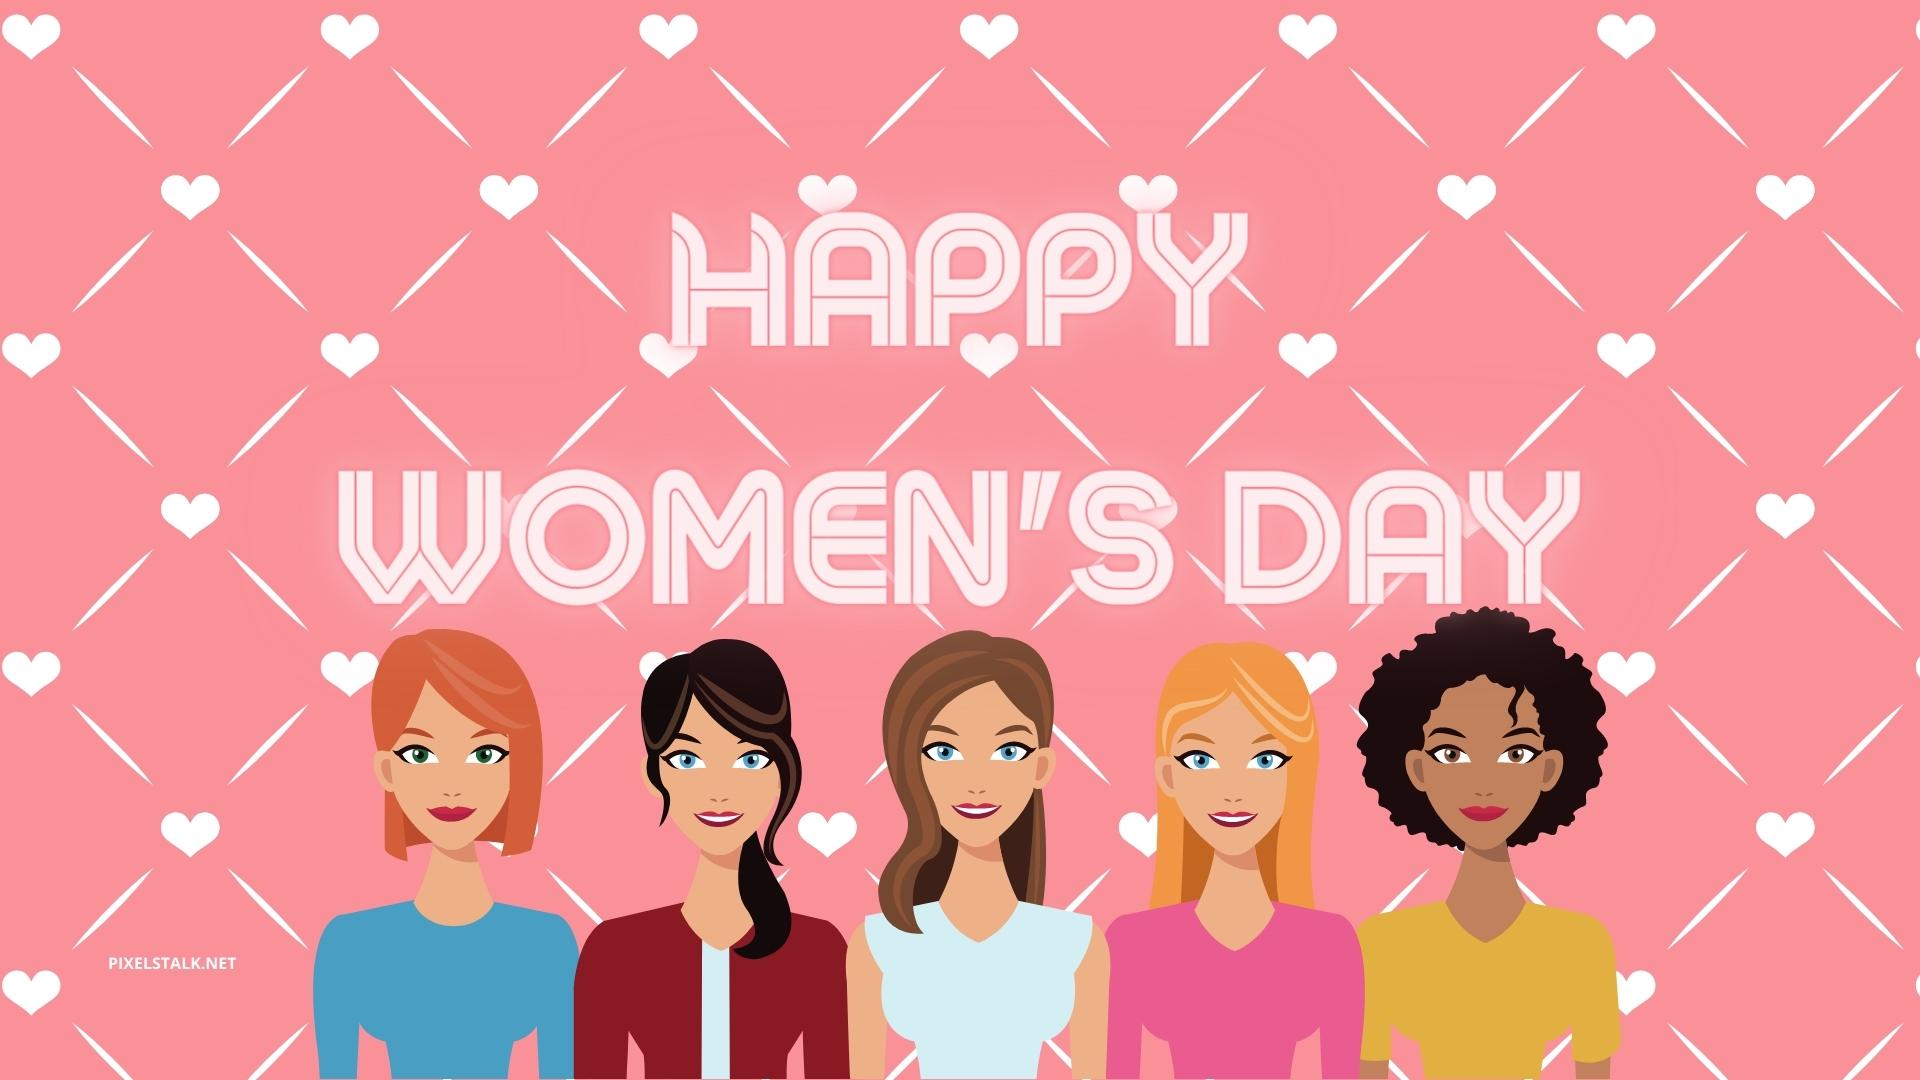 Beautiful Womens Day Wallpaper Images.